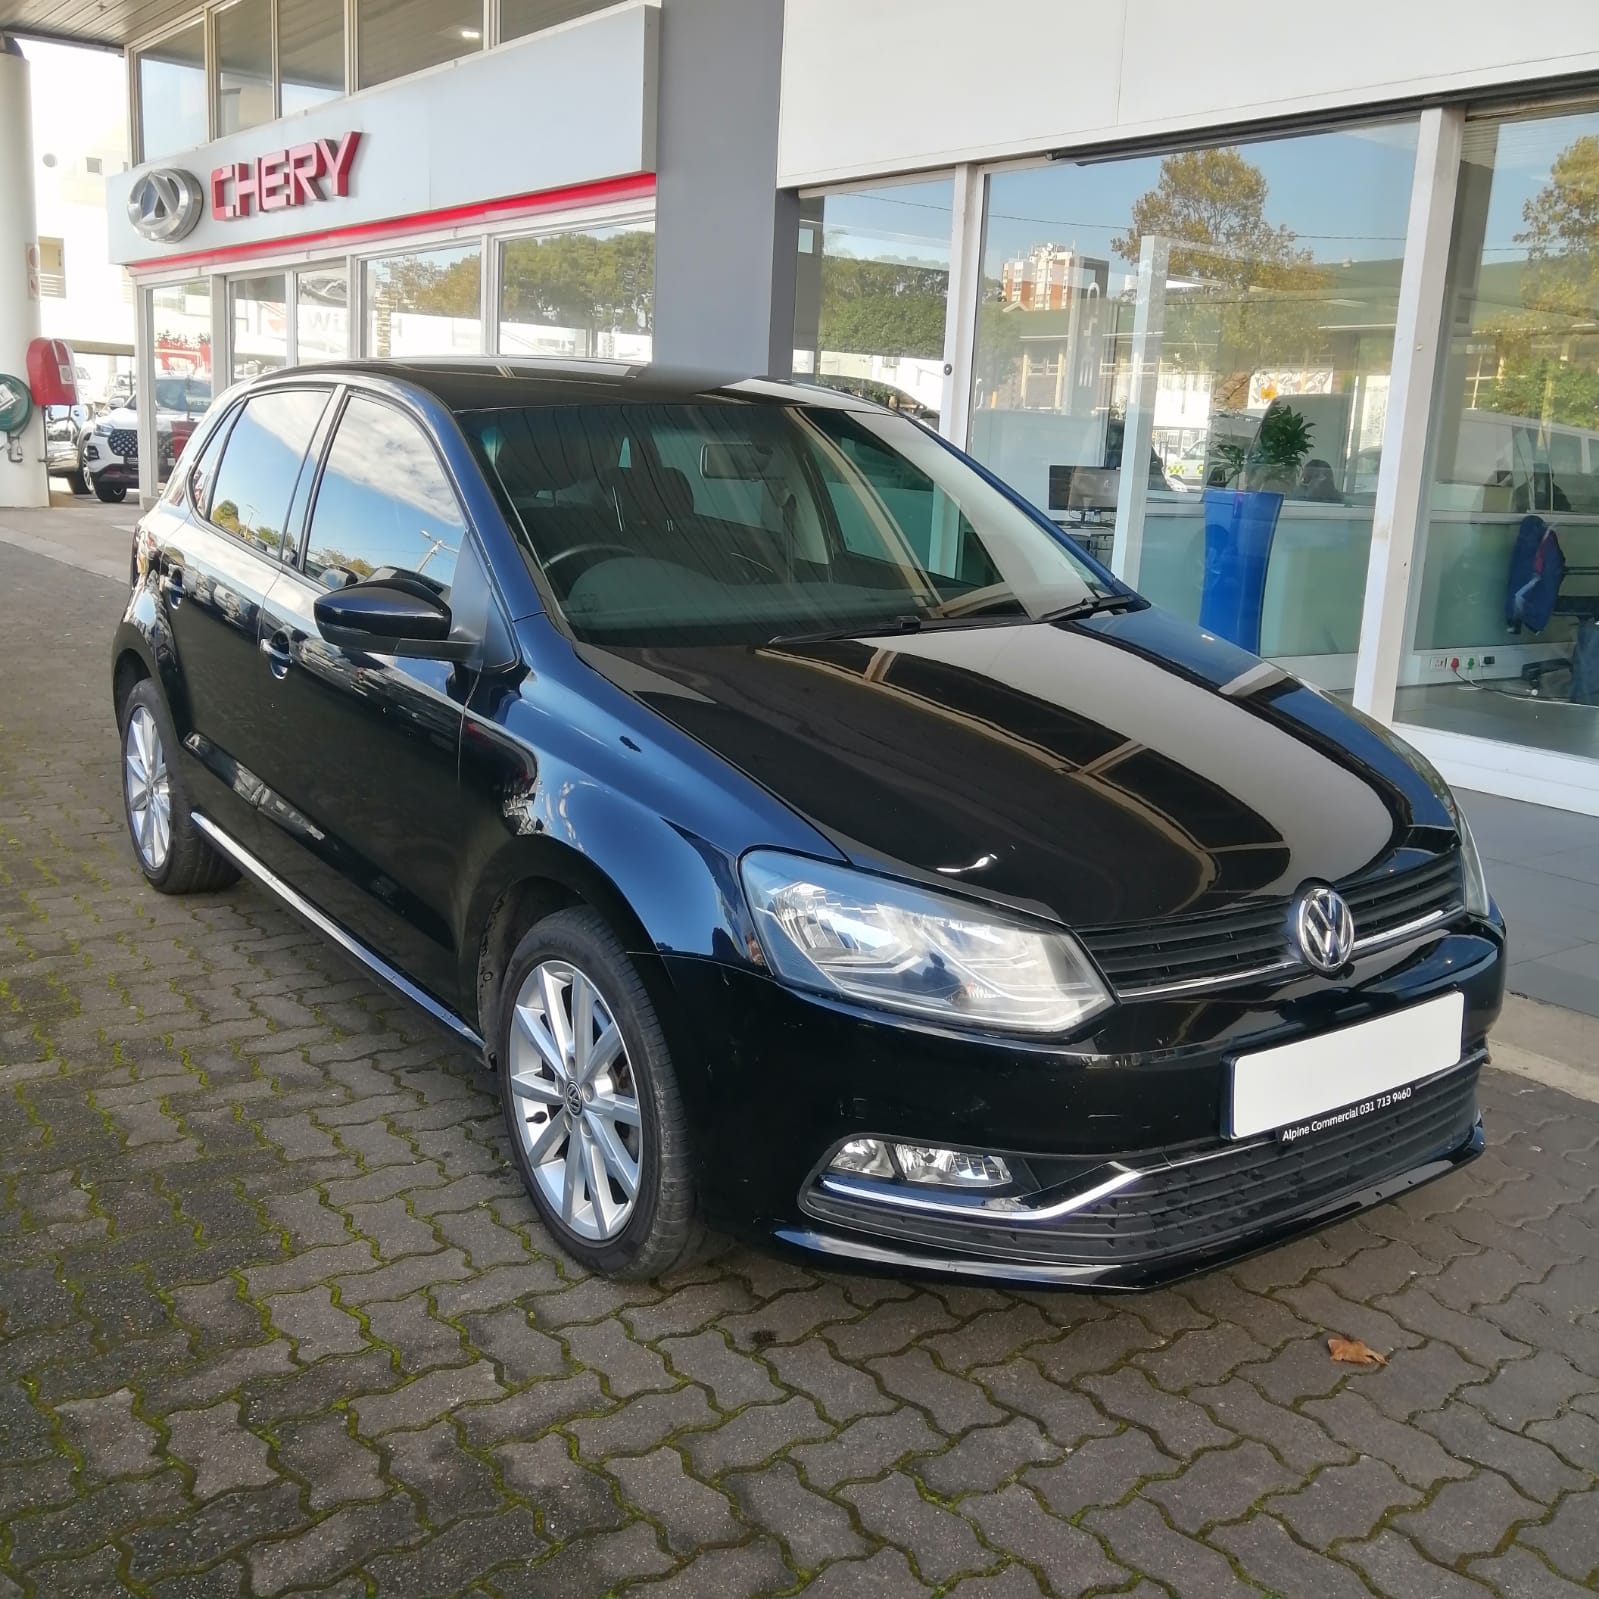 2014 Volkswagen Polo Hatch  for sale - 309048/2